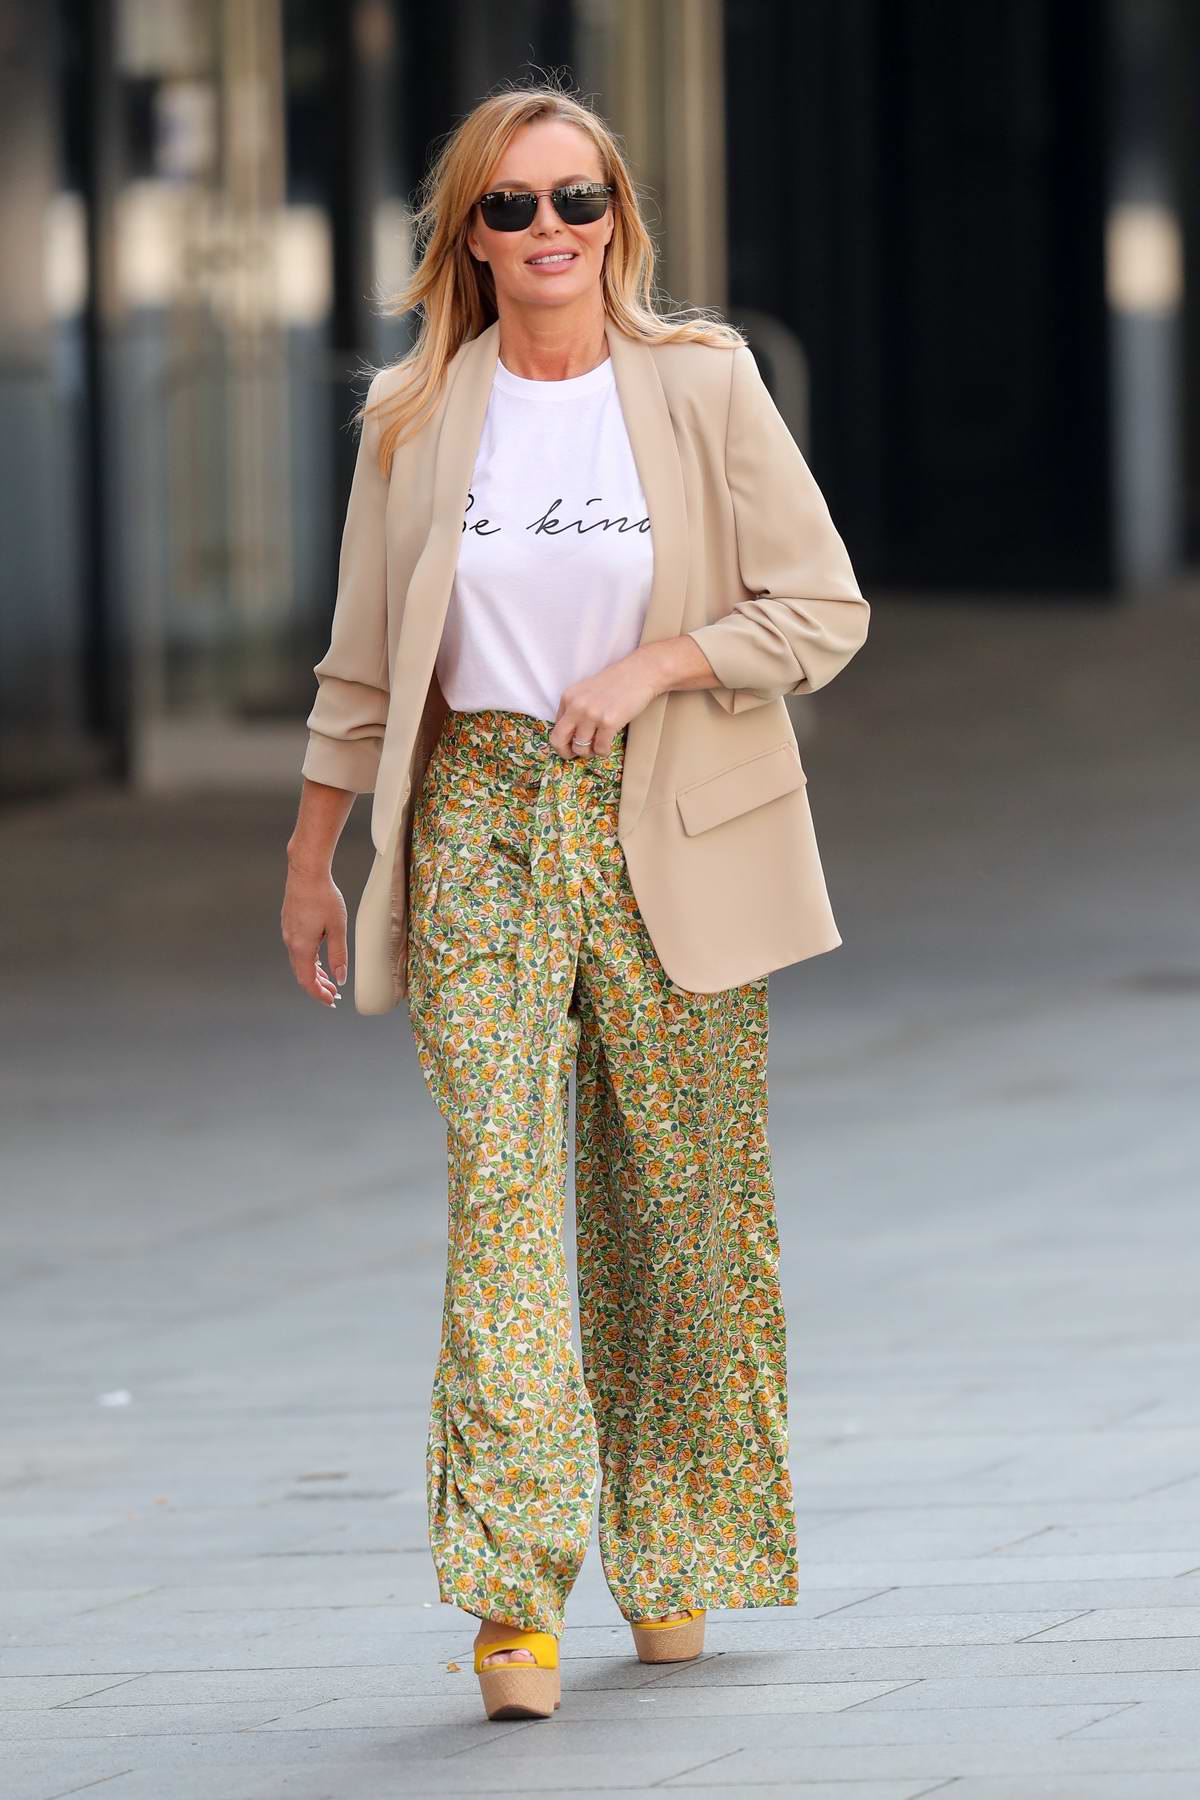 Amanda Holden wears Zara print trousers and SilkFred slogan top as she  exits Heart Radio in